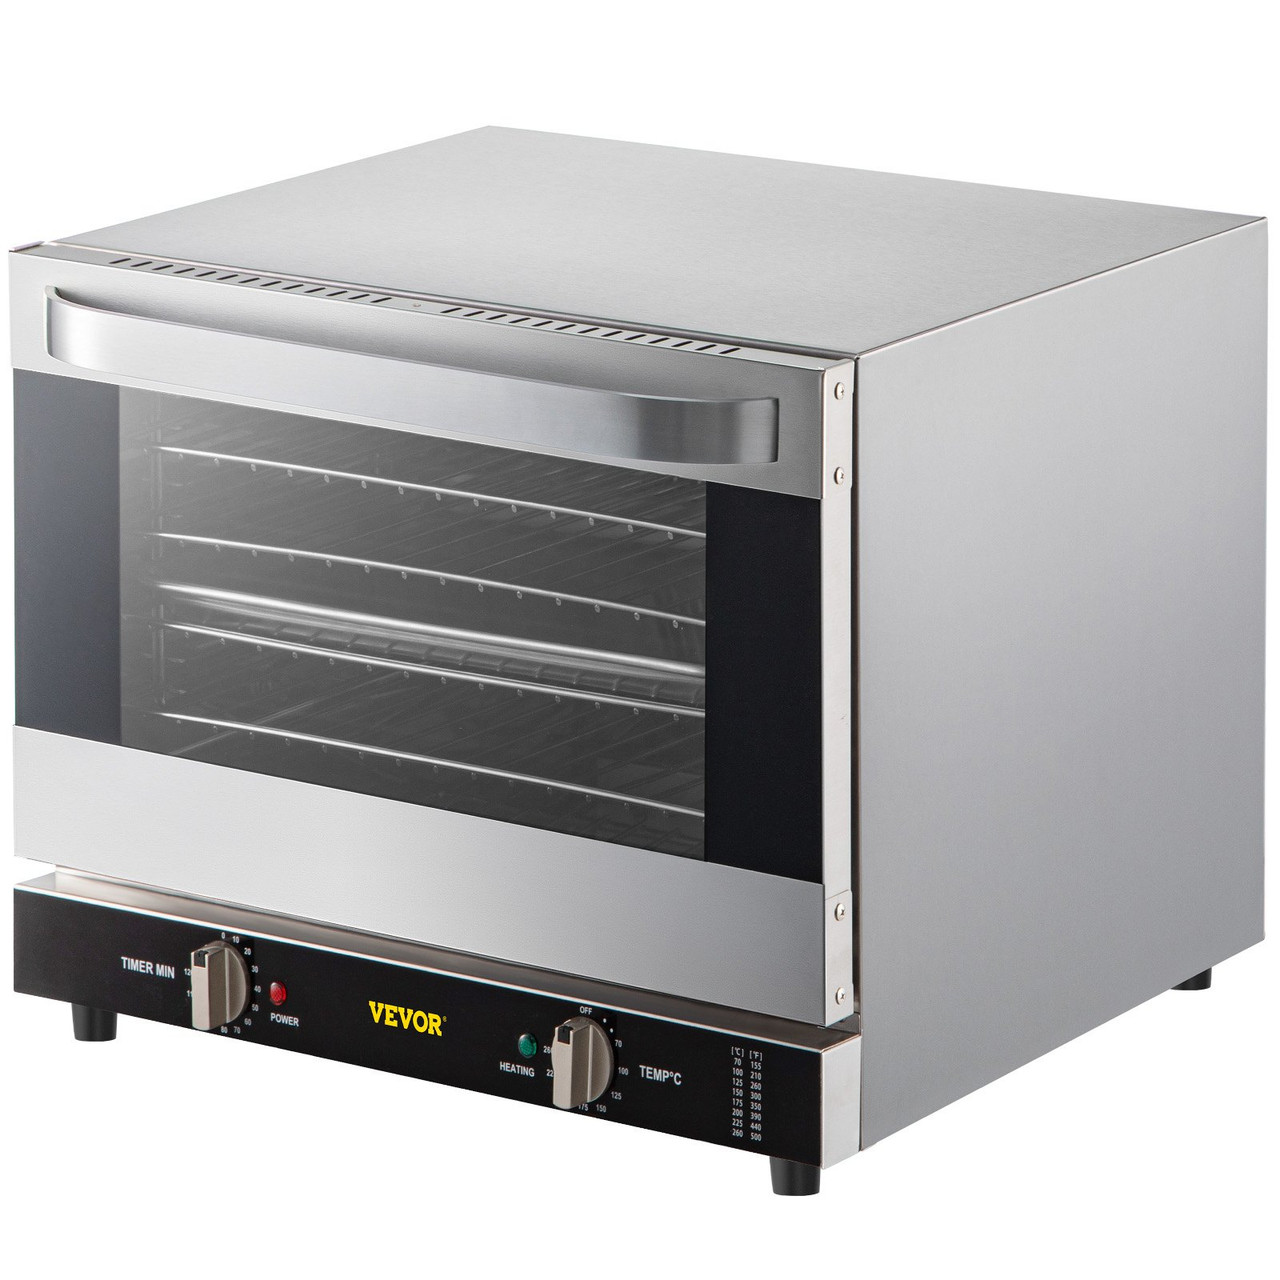 Commercial Convection Oven, 66L/60Qt, Half-Size Conventional Oven Countertop, 1800W 4-Tier Toaster w/ Front Glass Door, Electric Baking Oven w/ Trays